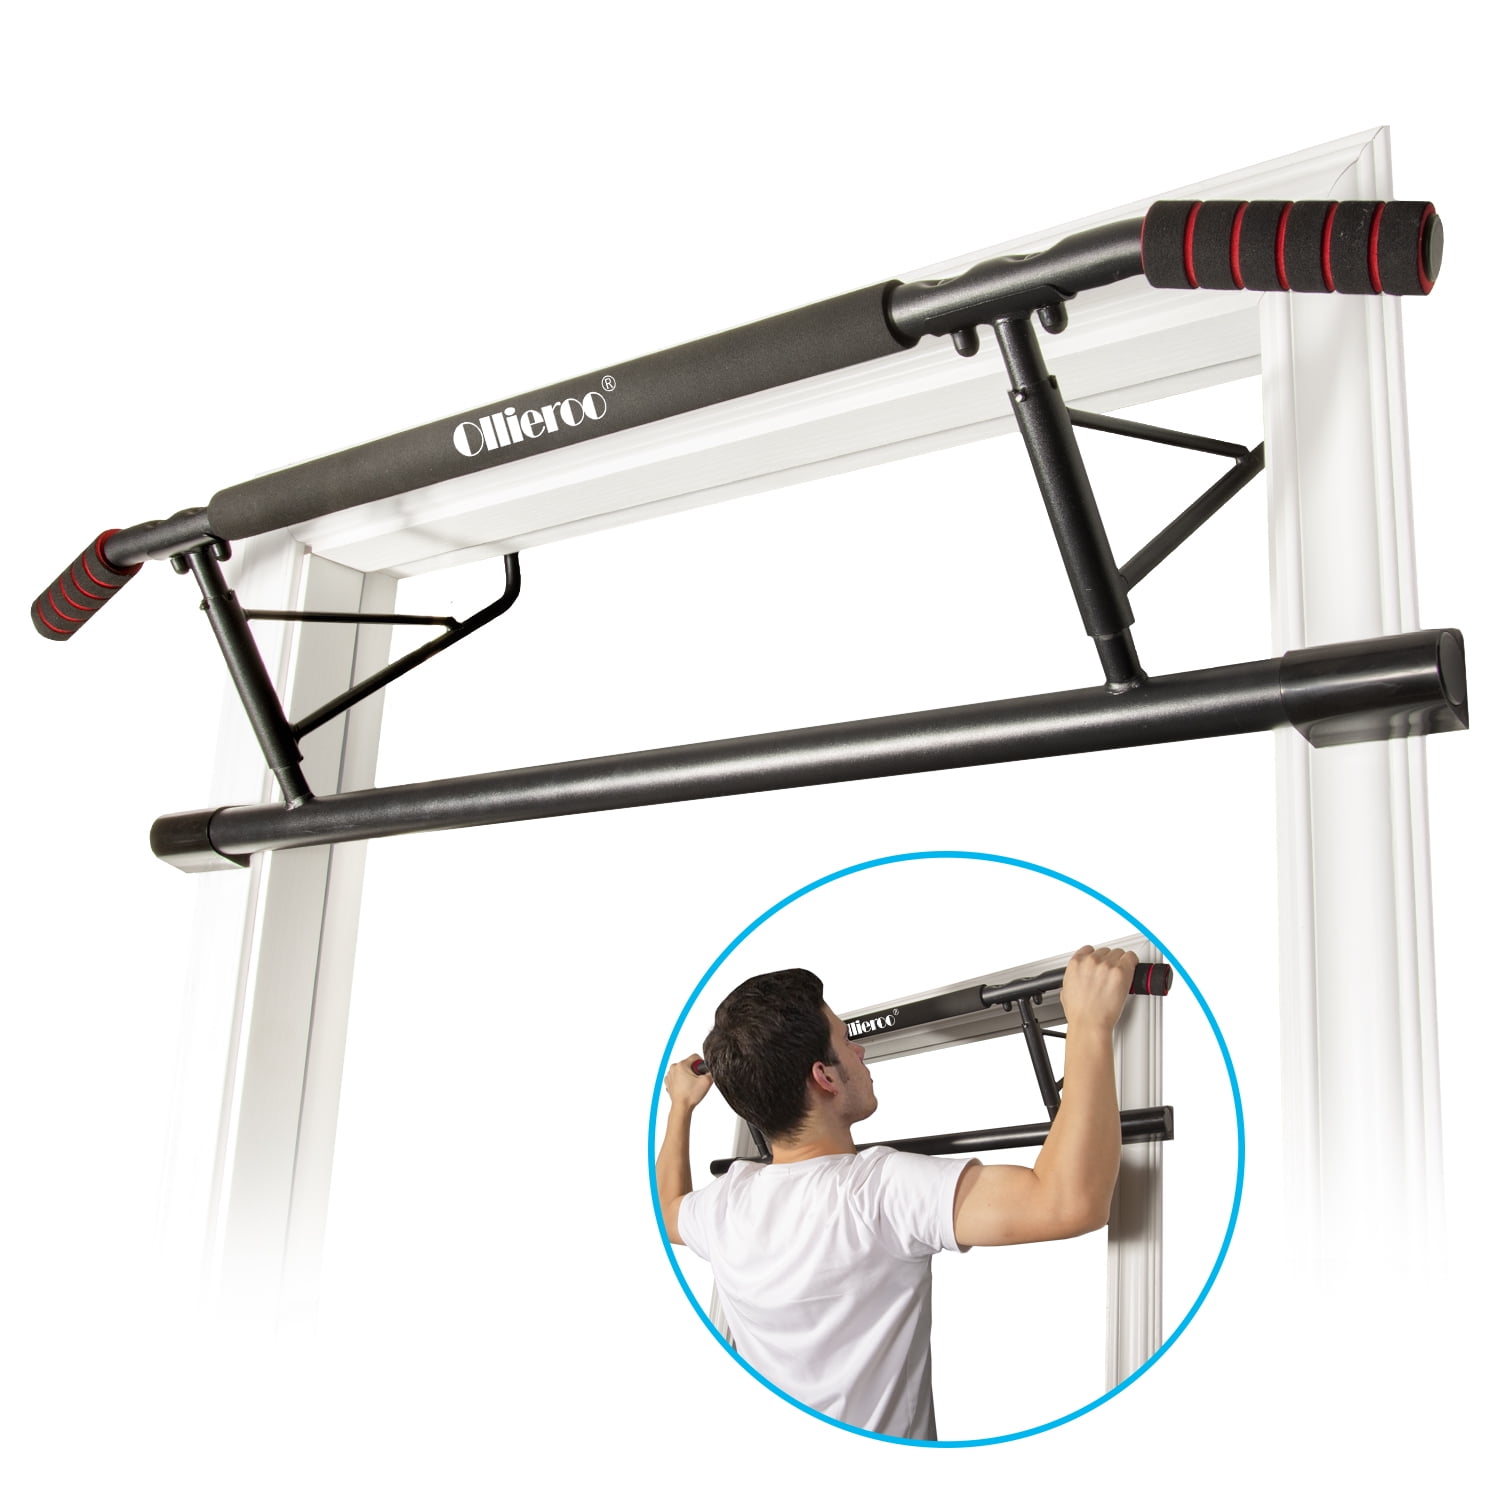 Pull Up Bar For Doorway Door Frame Chin Up Bar No Screws Wall Mounted Upper Body Workout Trainer Bar Multifunctional Strength Training Equipment with Soft Grip for Indoor Fitness Blue 